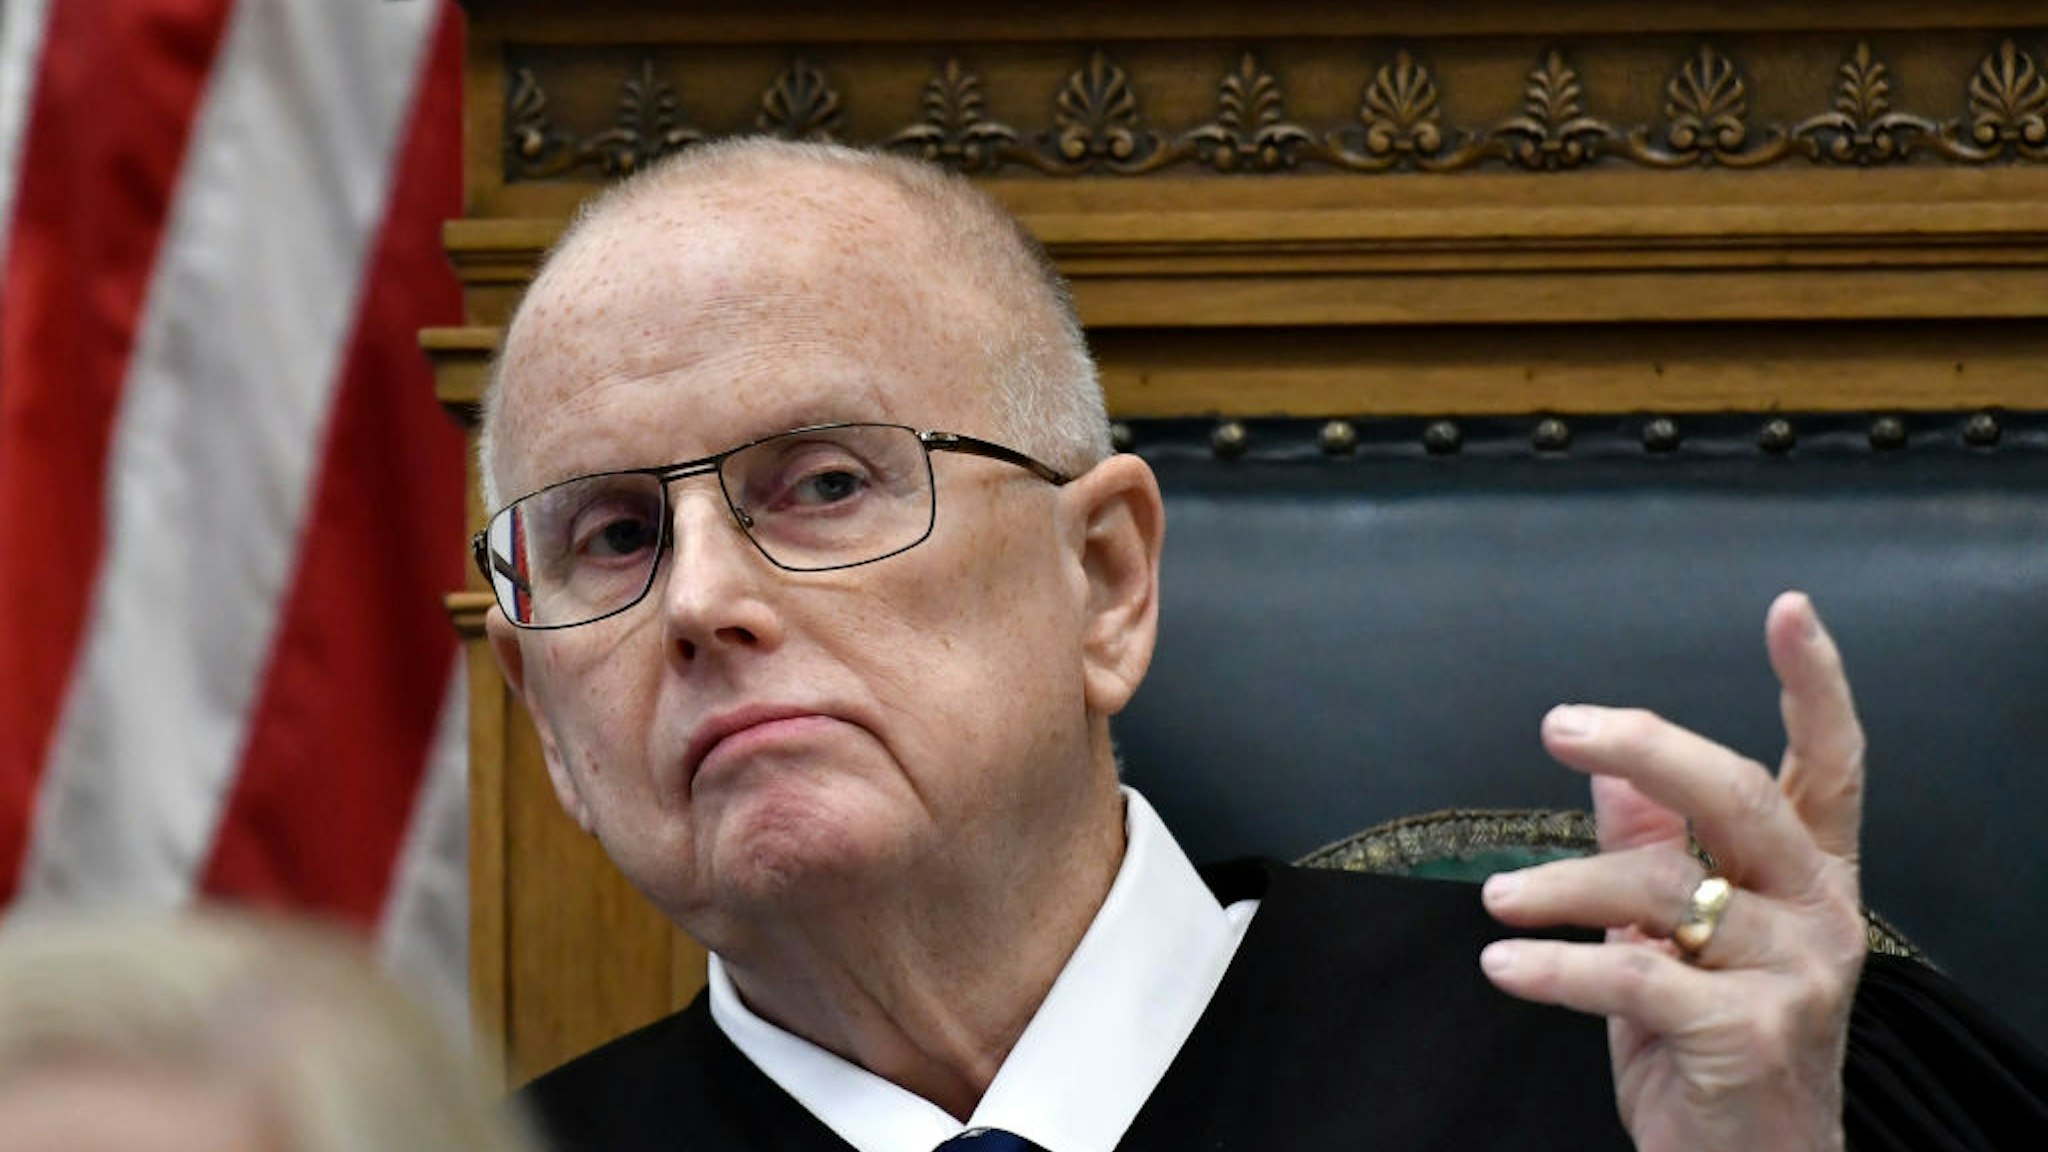 Judge Bruce Schroeder speaks to issues on jury instruction during Kyle Rittenhouse's trial at the Kenosha County Courthouse on November 15, 2021 in Kenosha, Wisconsin.